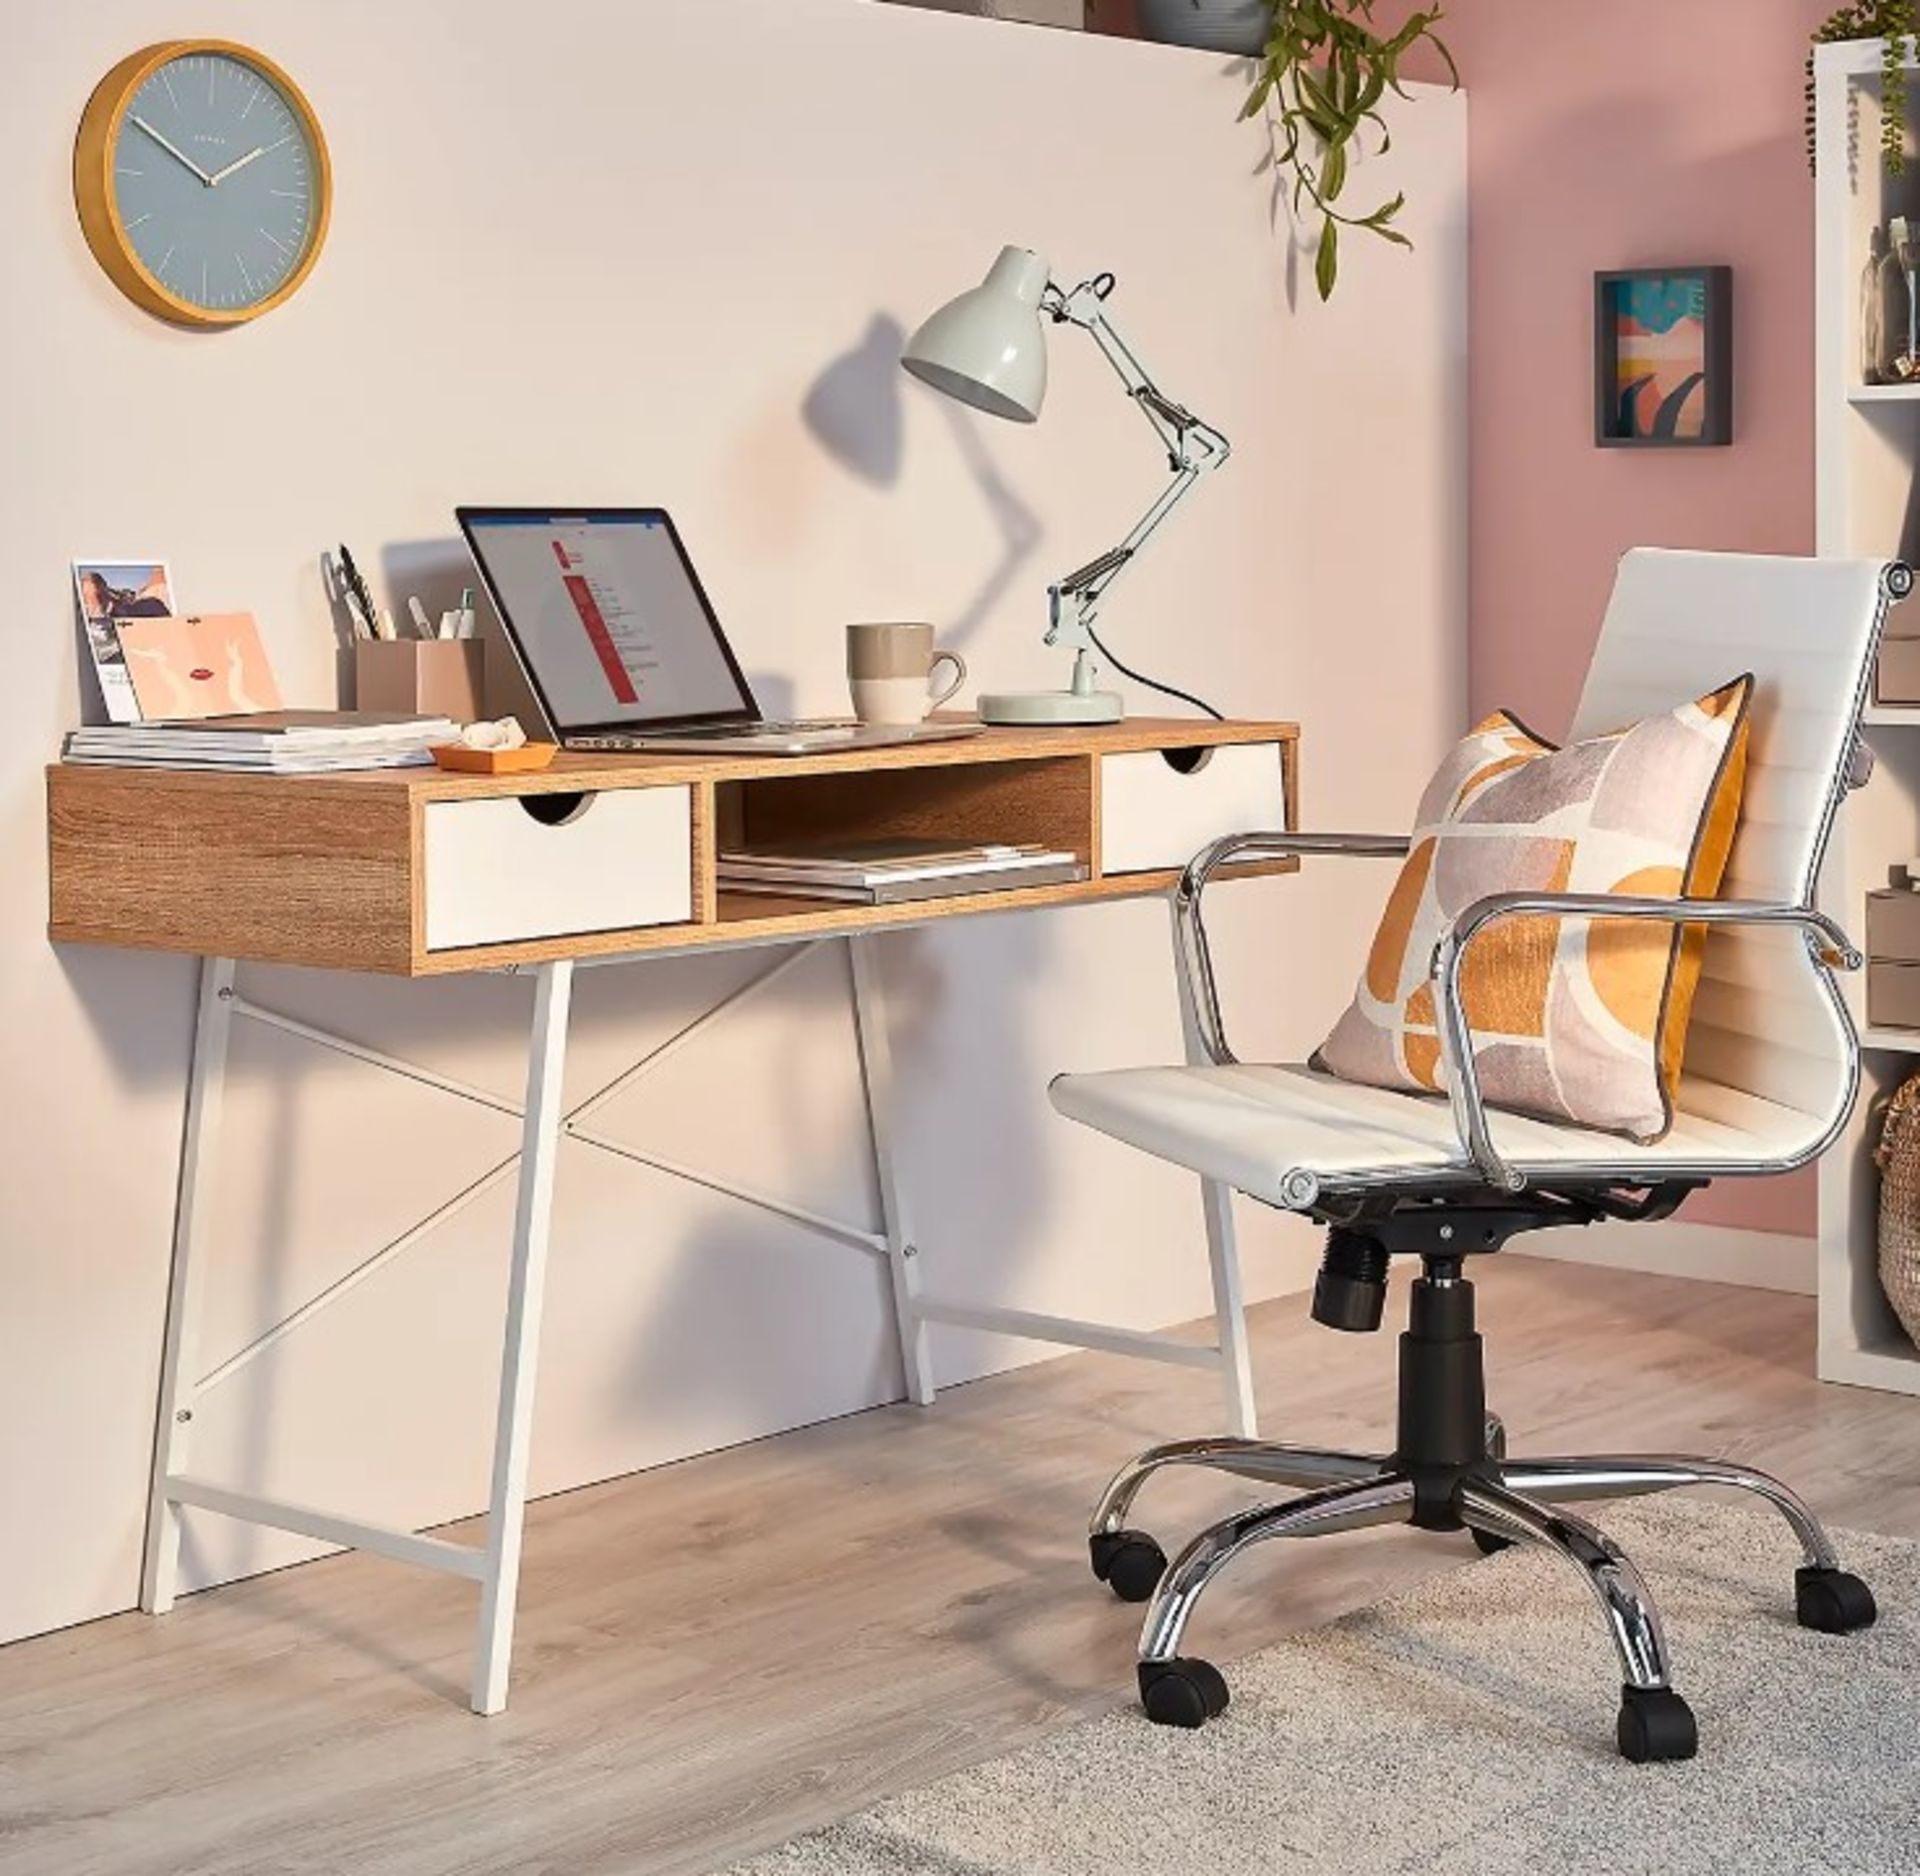 (161/Mez) Donna Desk With White Drawers. Multi Functional Desk Or Console Table With 2 White Draw... - Image 3 of 4